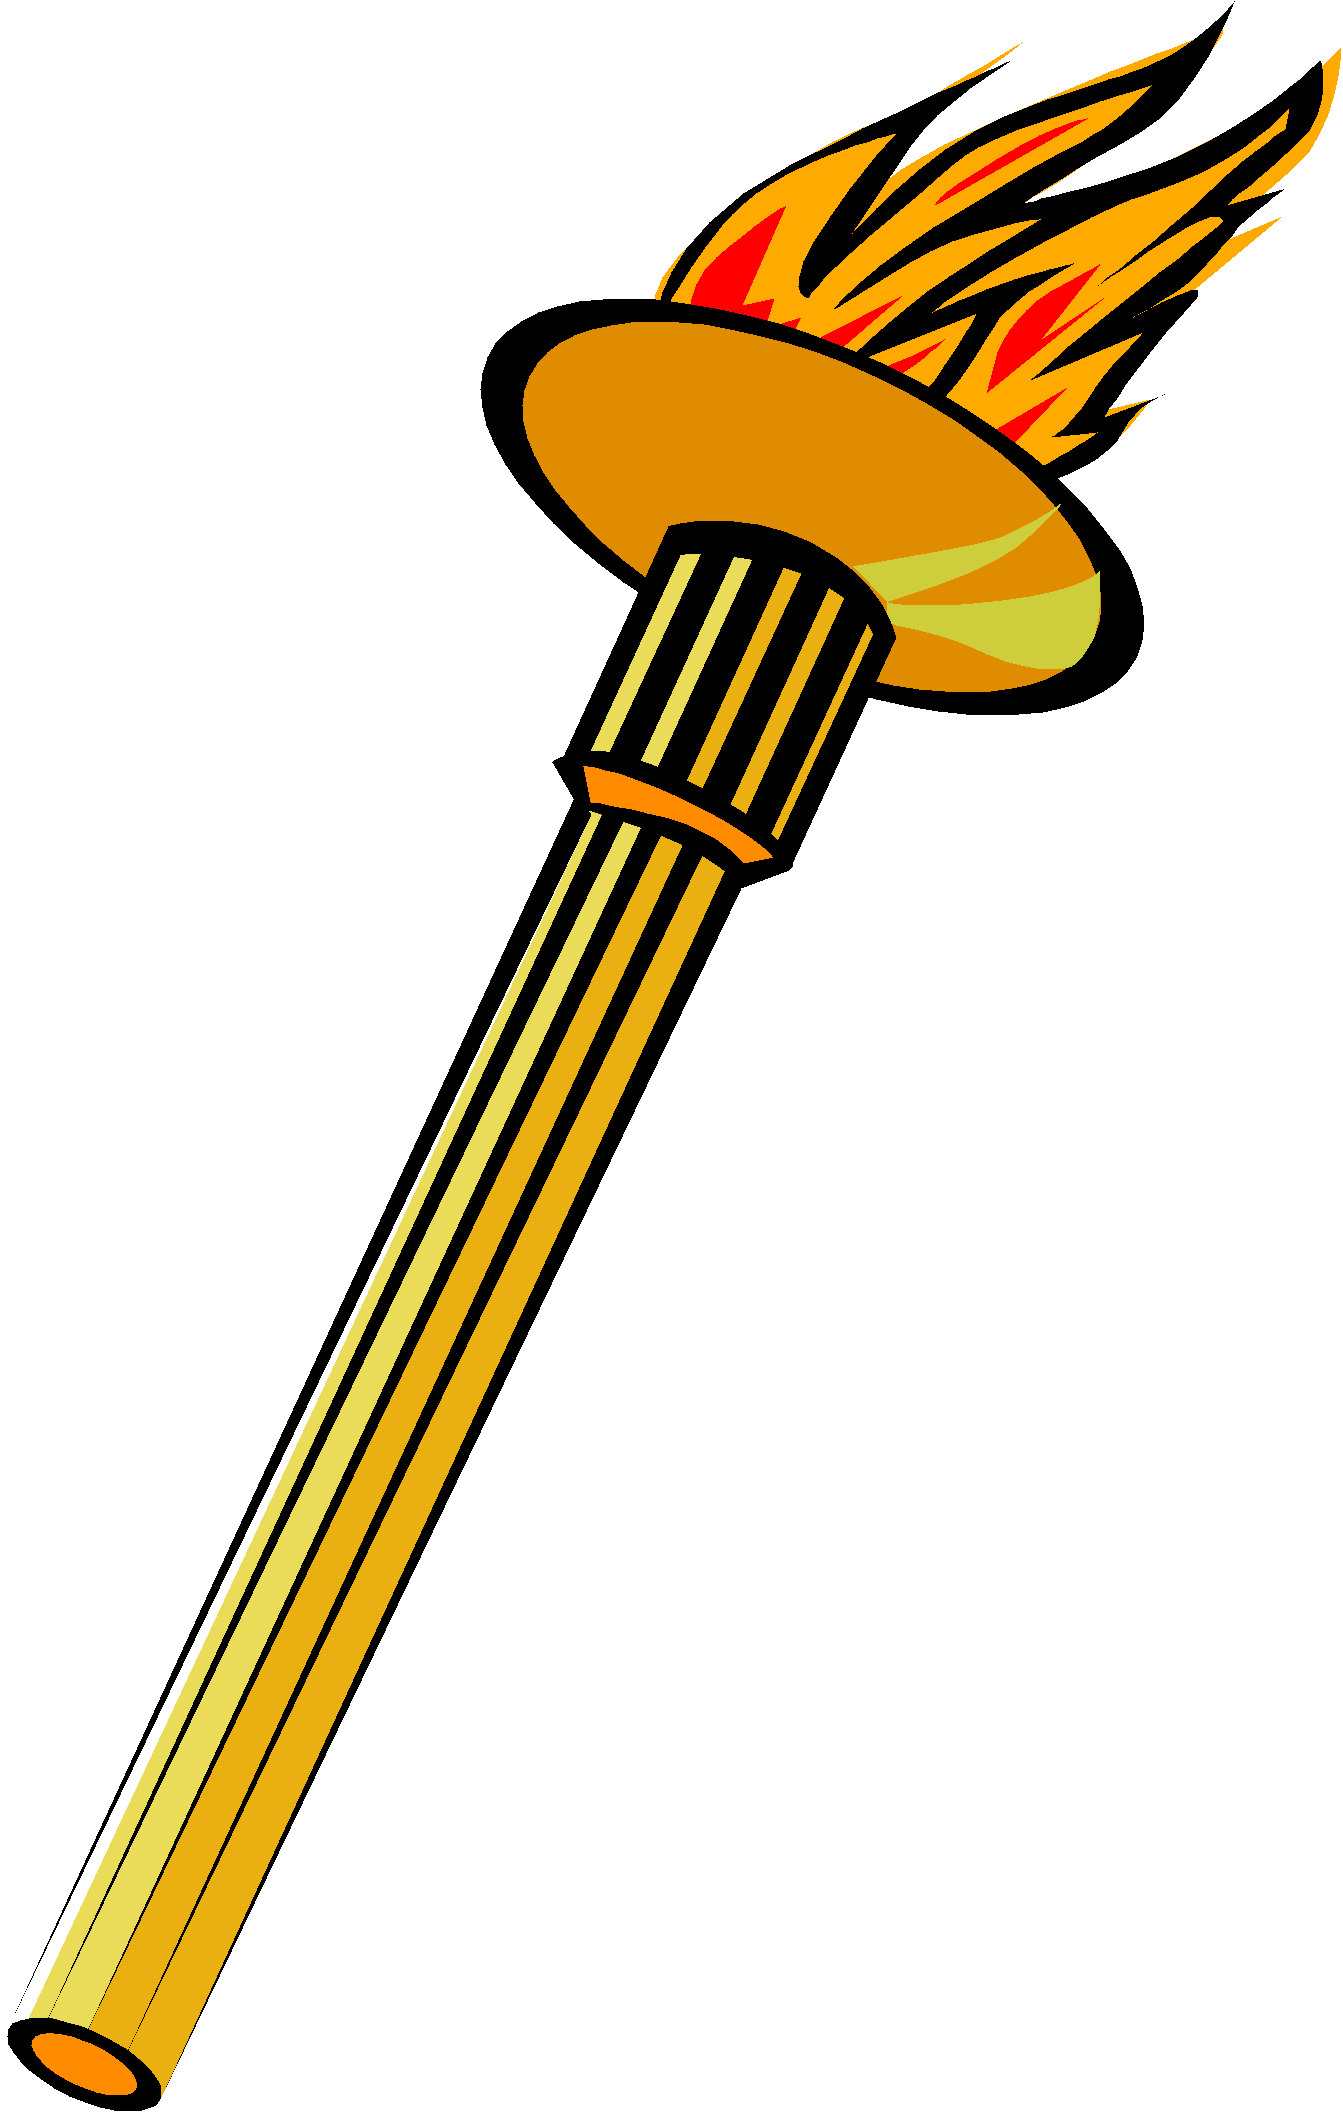 Affordable For Olympic Torch Logo Displaying Images - Olympic Games Torch Gif (1334x2110)